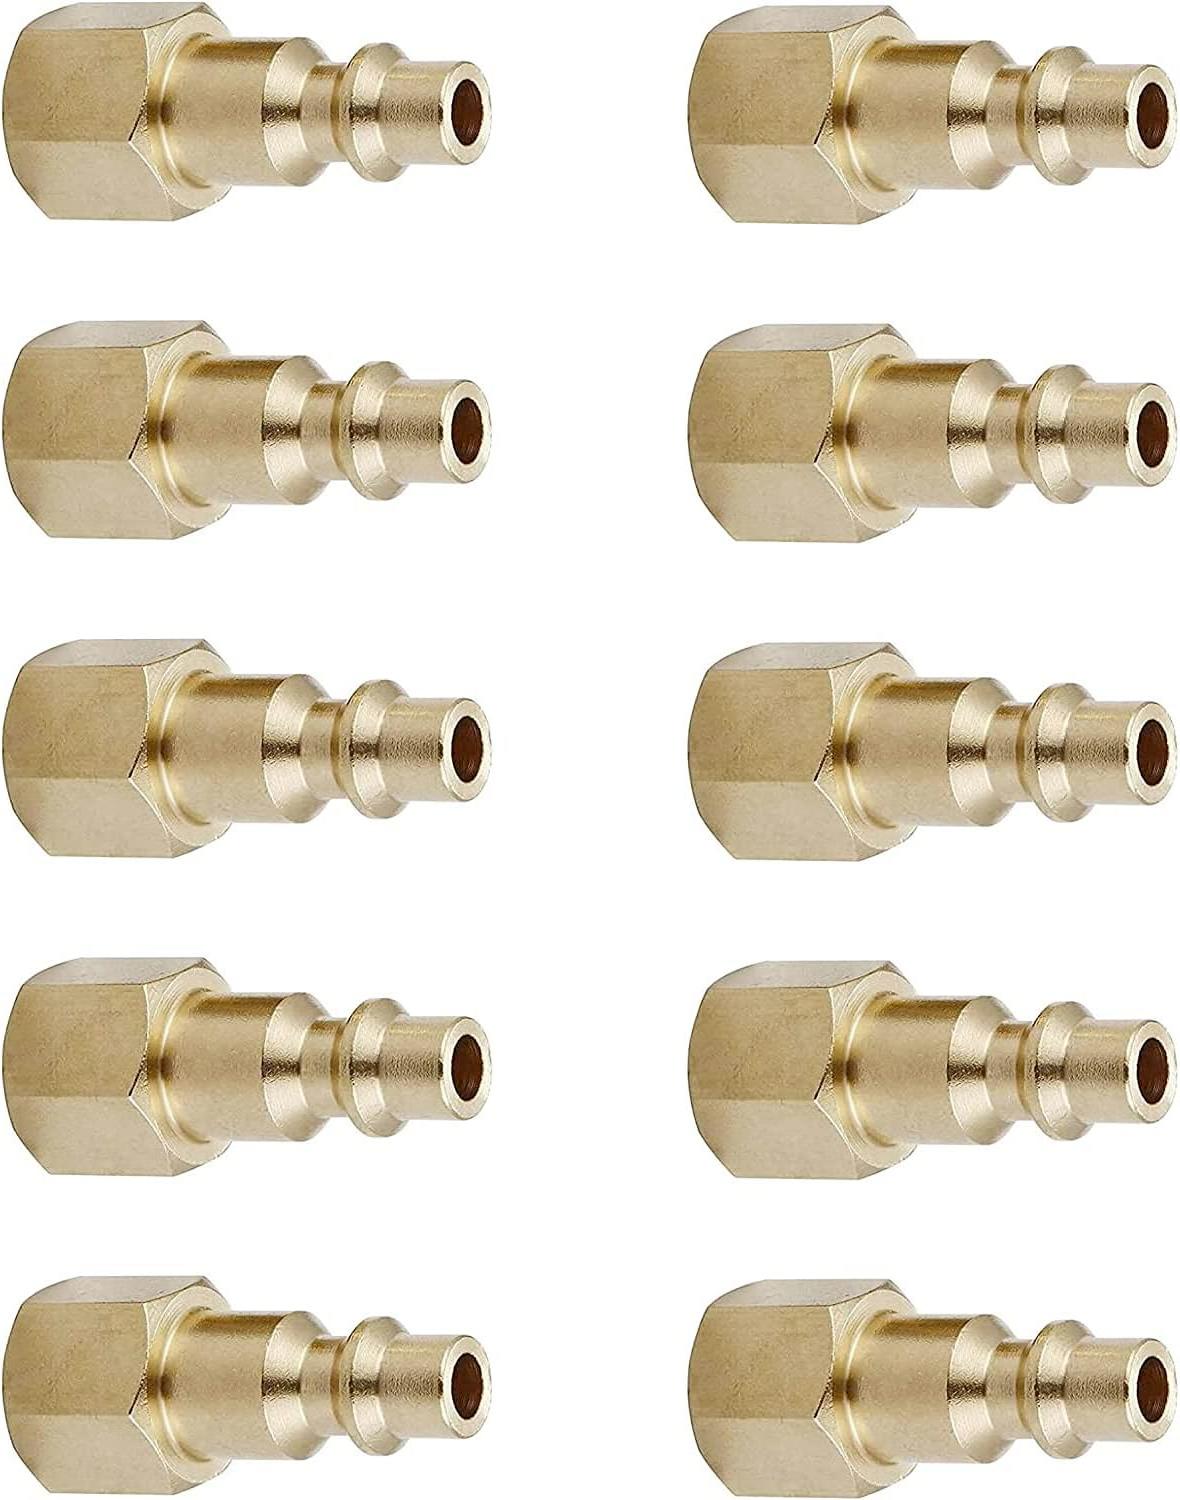 1/4 Air Hose Fittings - 1/4 Inch Quick Connect Air Hose Fitting, 5-Pieces  Female Air Coupler and Plug Kit For Air Tool Fittings